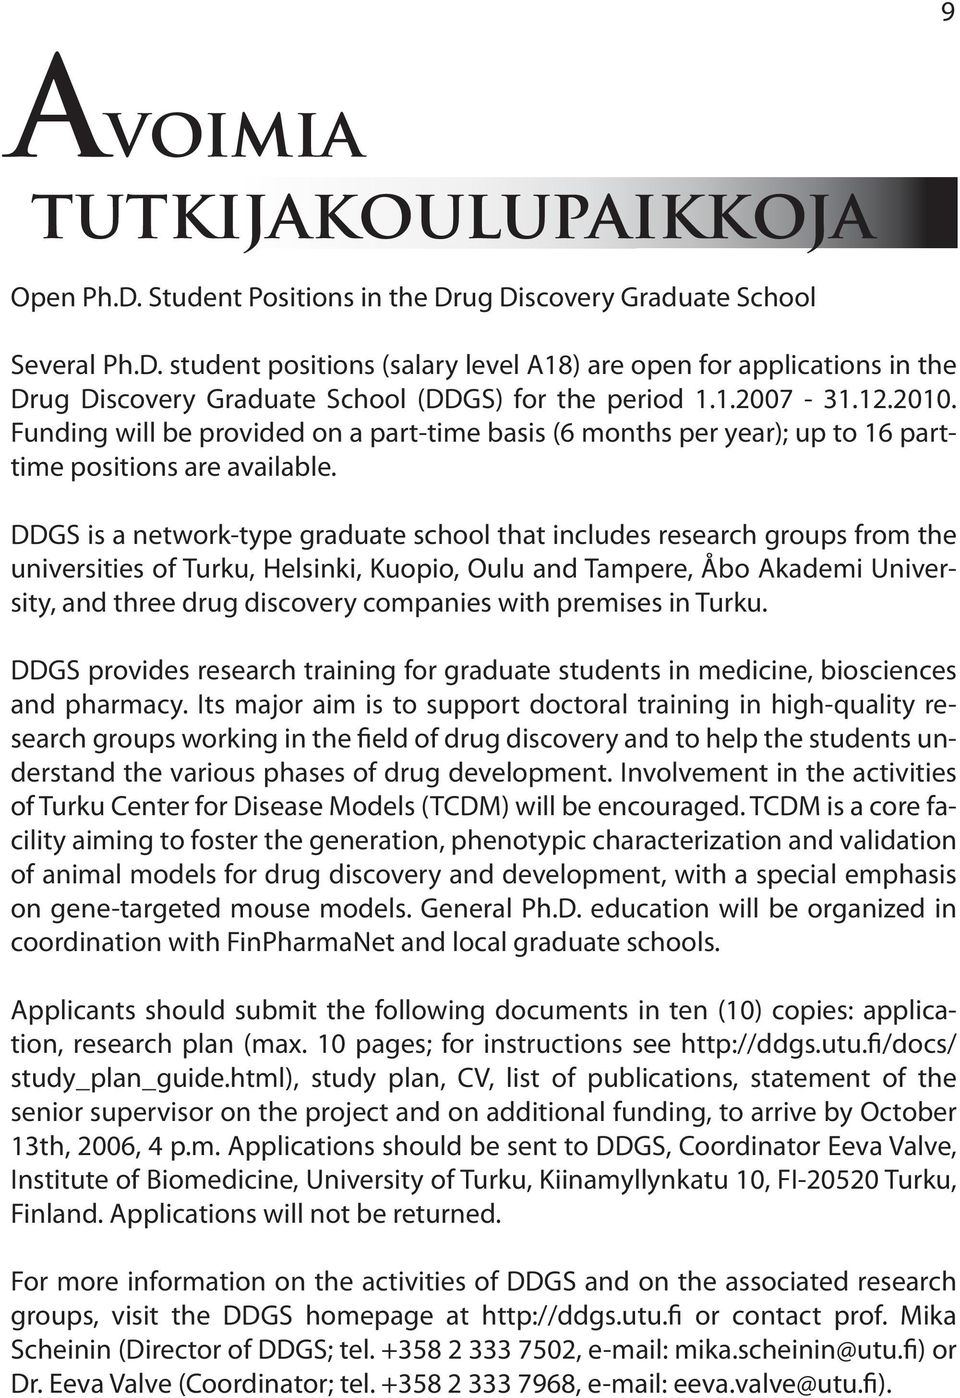 DDGS is a network-type graduate school that includes research groups from the universities of Turku, Helsinki, Kuopio, Oulu and Tampere, Åbo Akademi University, and three drug discovery companies